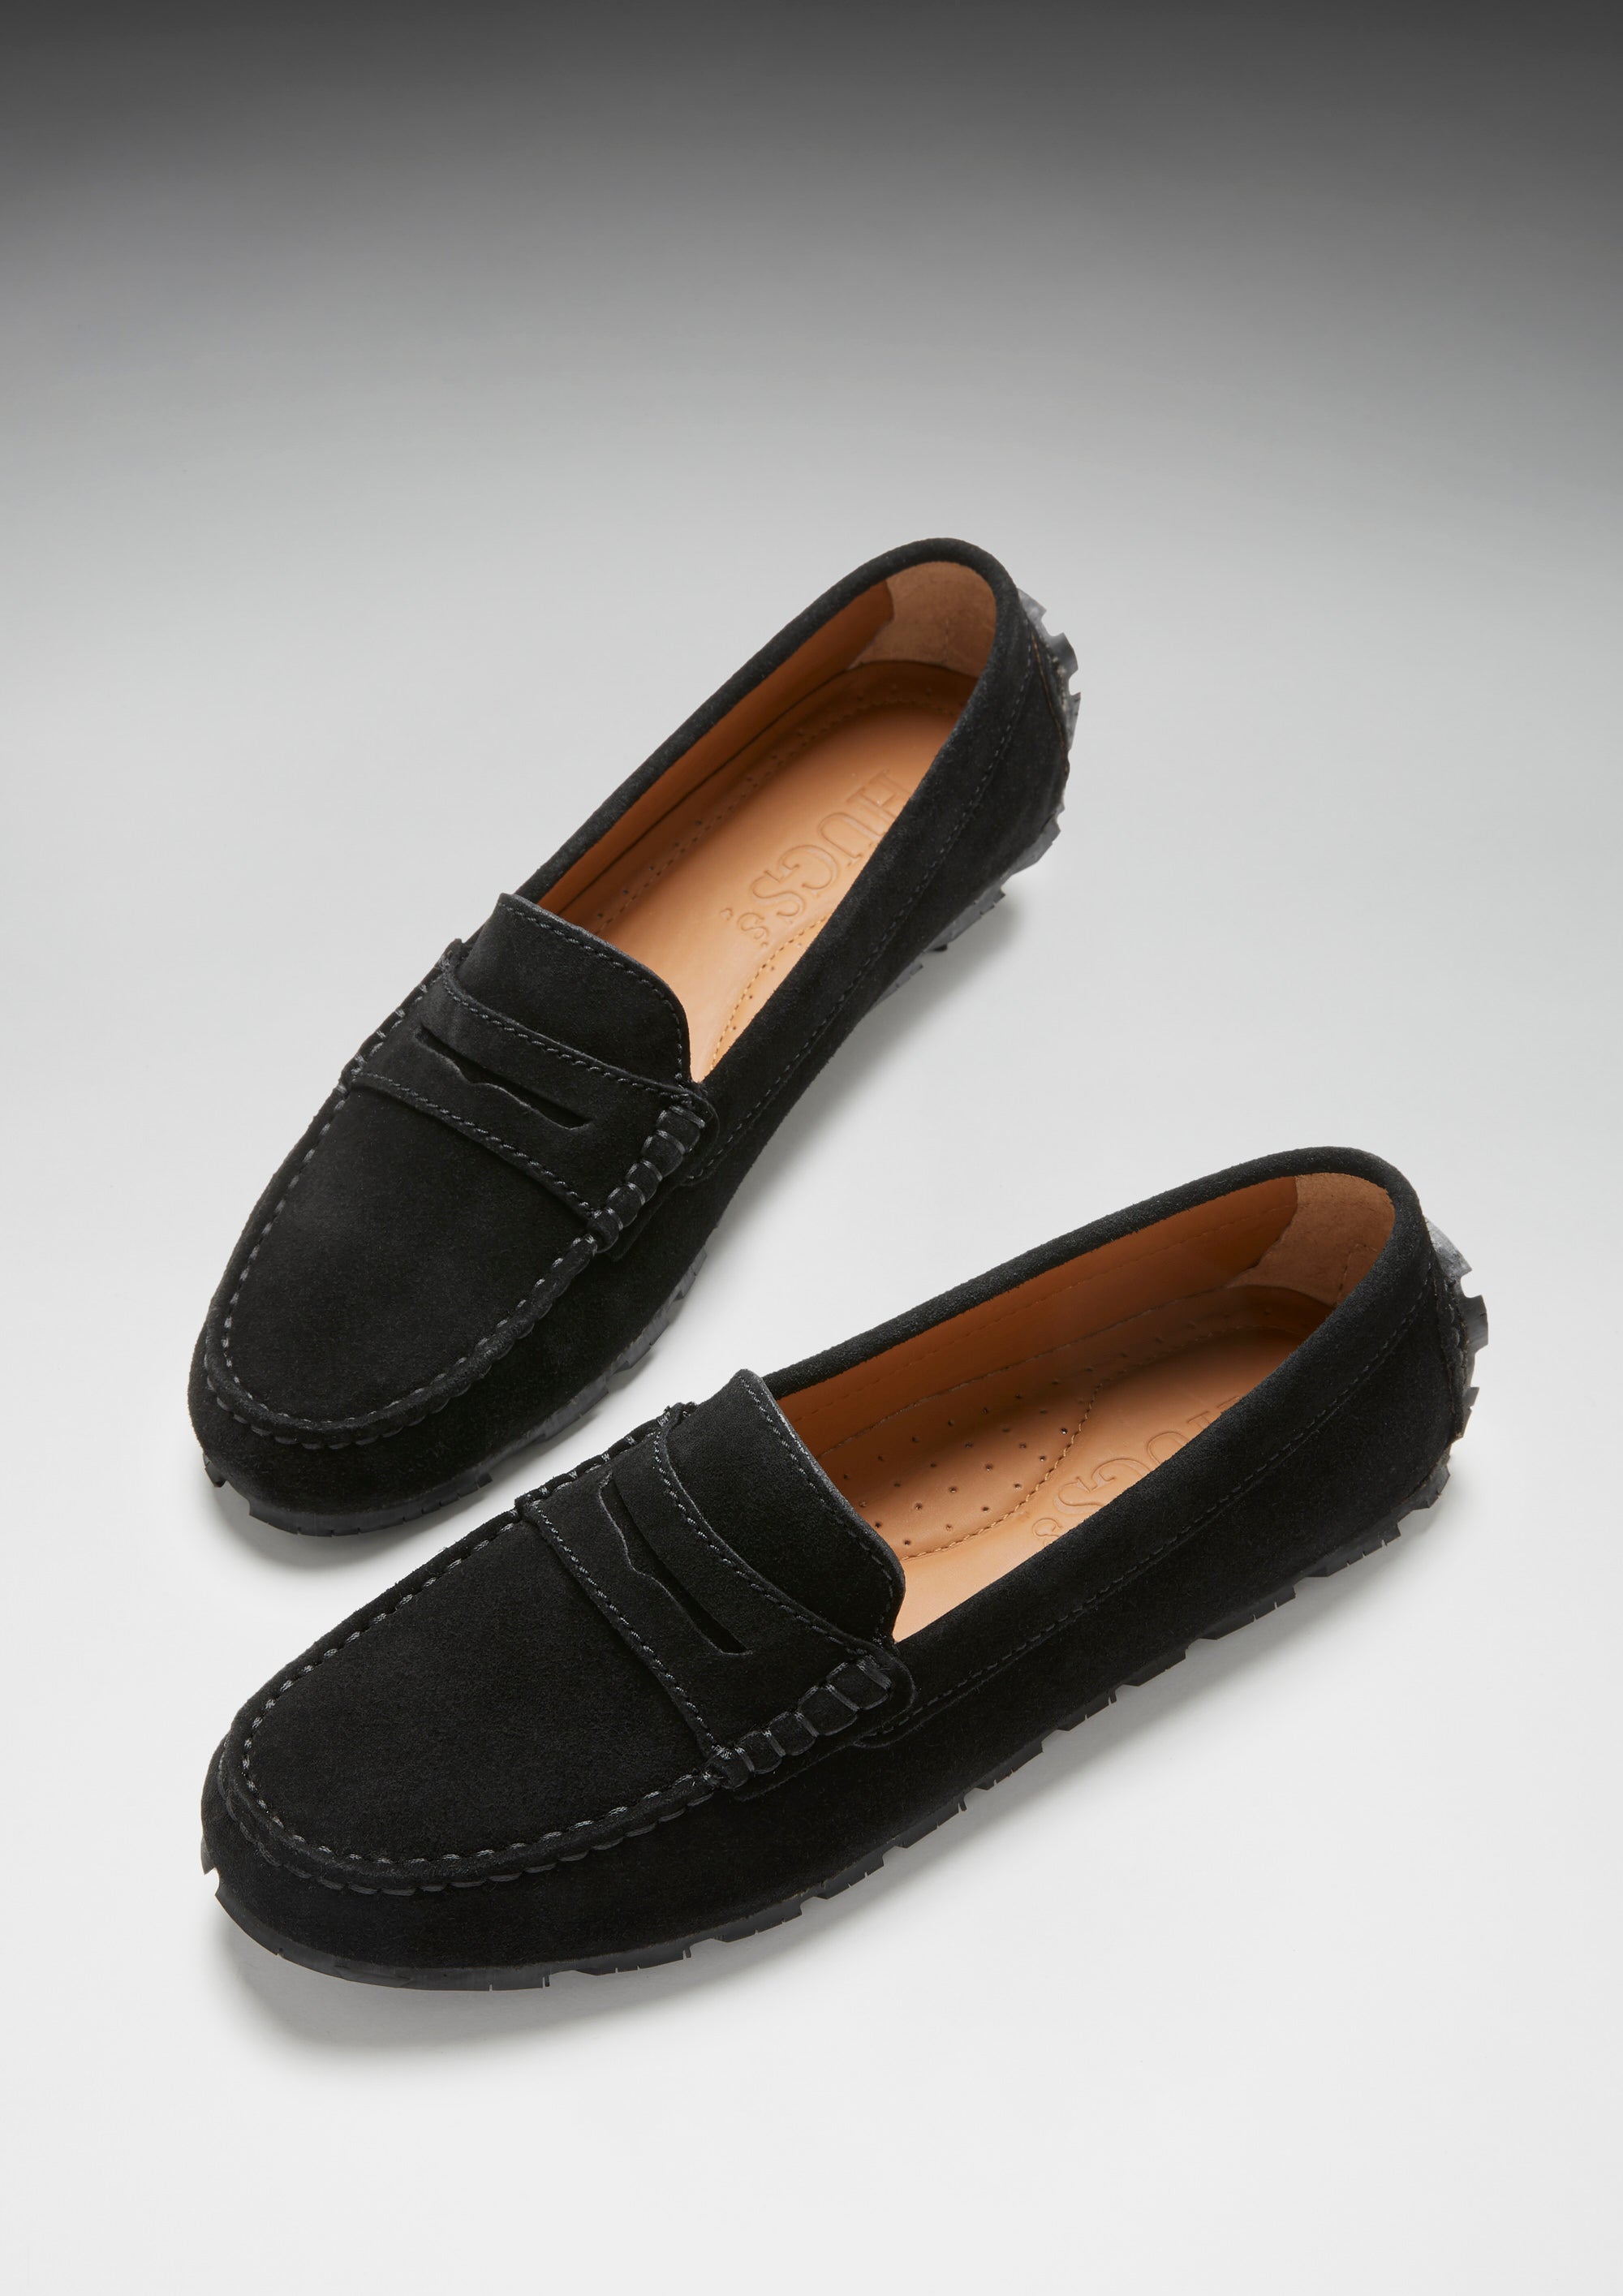 Tyre Sole Penny Loafers, black suede 